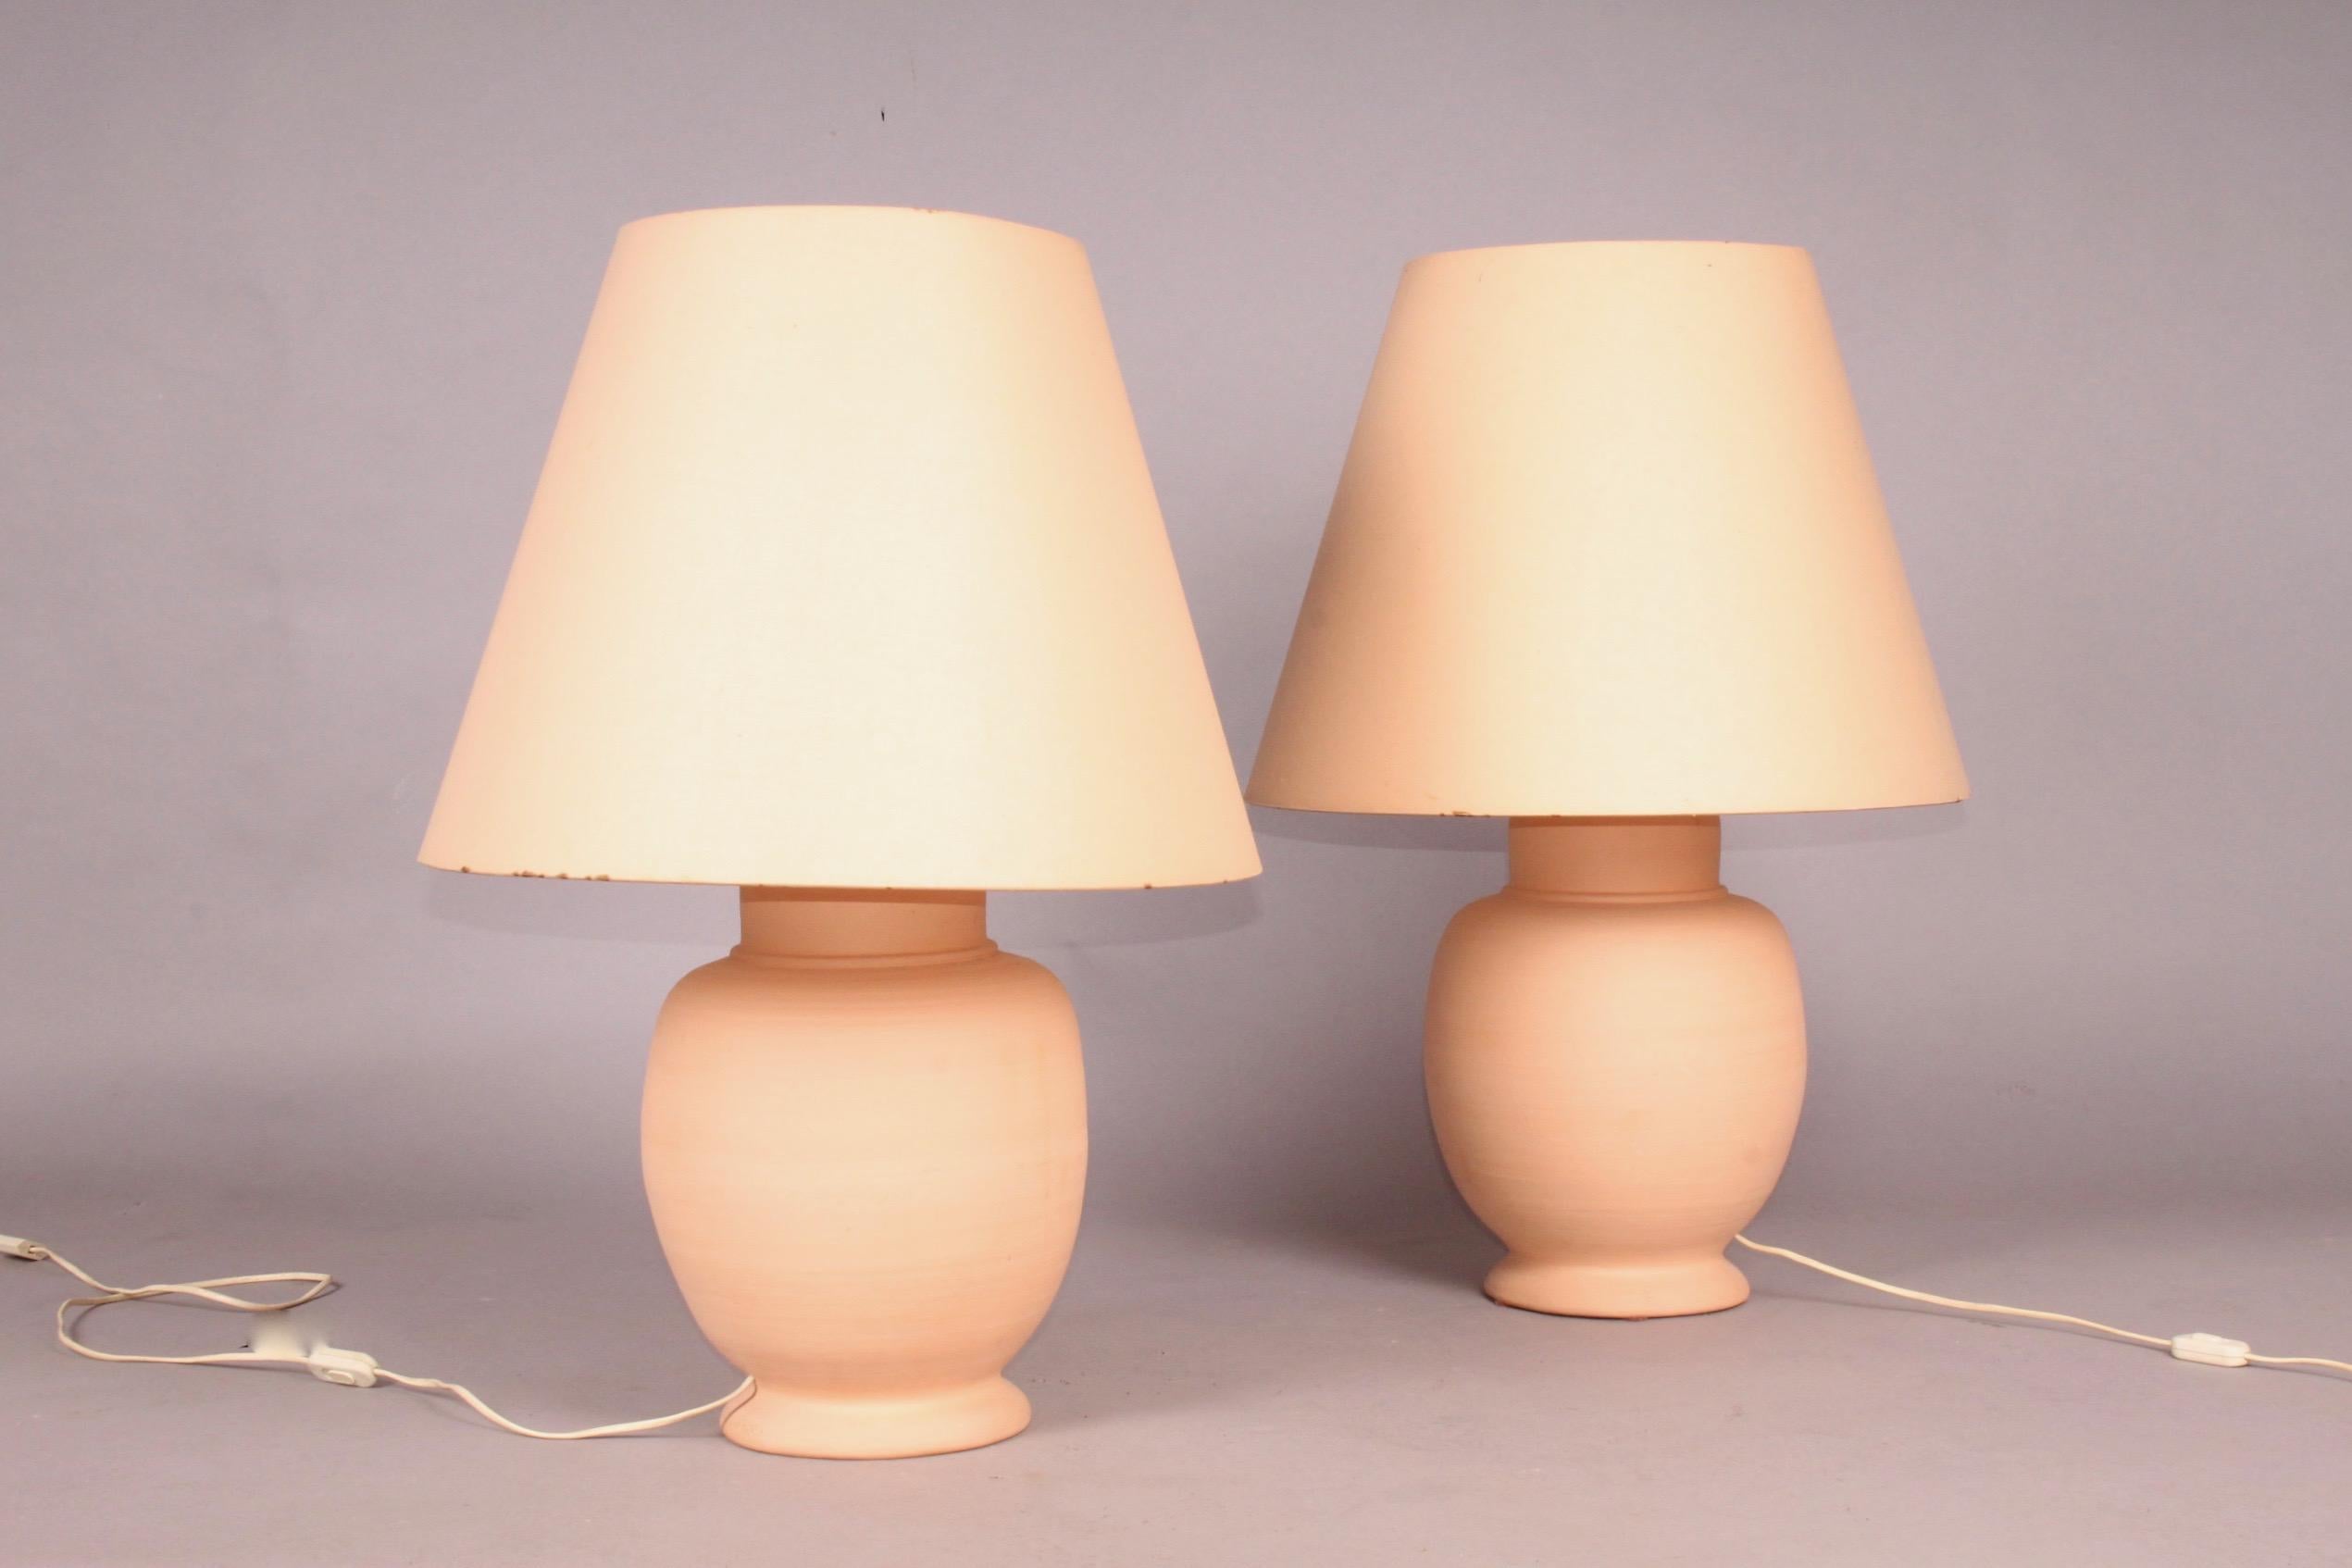 French terre cuite pair of table lamp, marked under the base Fait main au tour, dimensions with out shade height 48, diametre 27 cm.